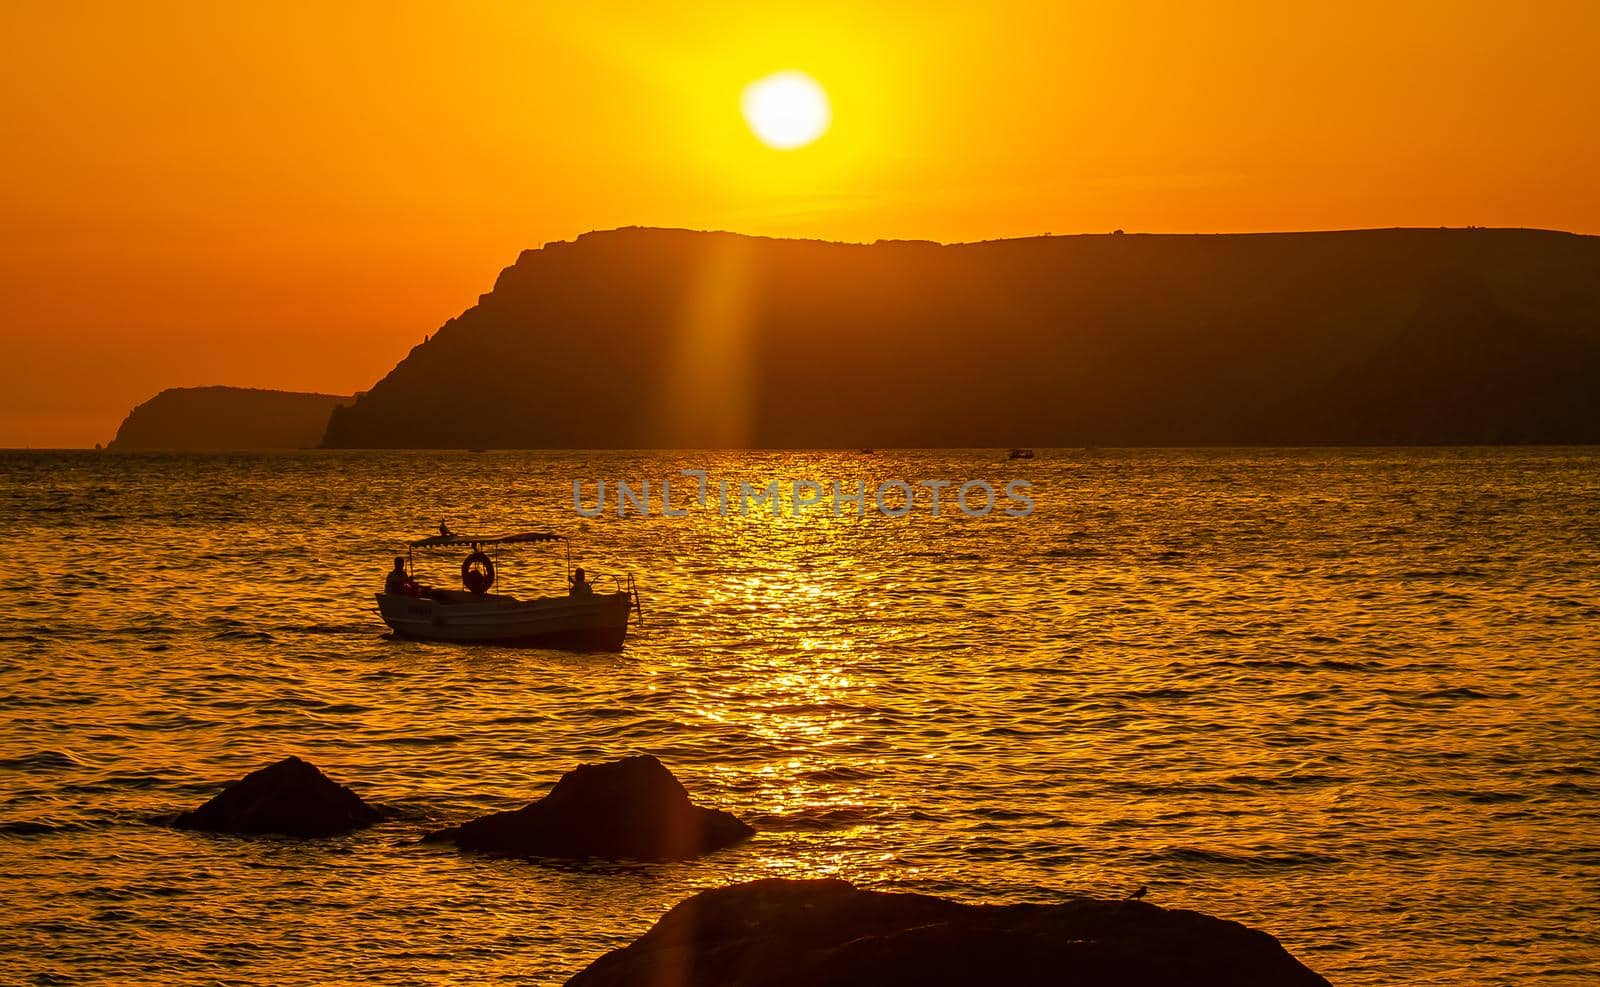 A pleasure boat in a quiet bay of the Black Sea in the light of the setting sun.